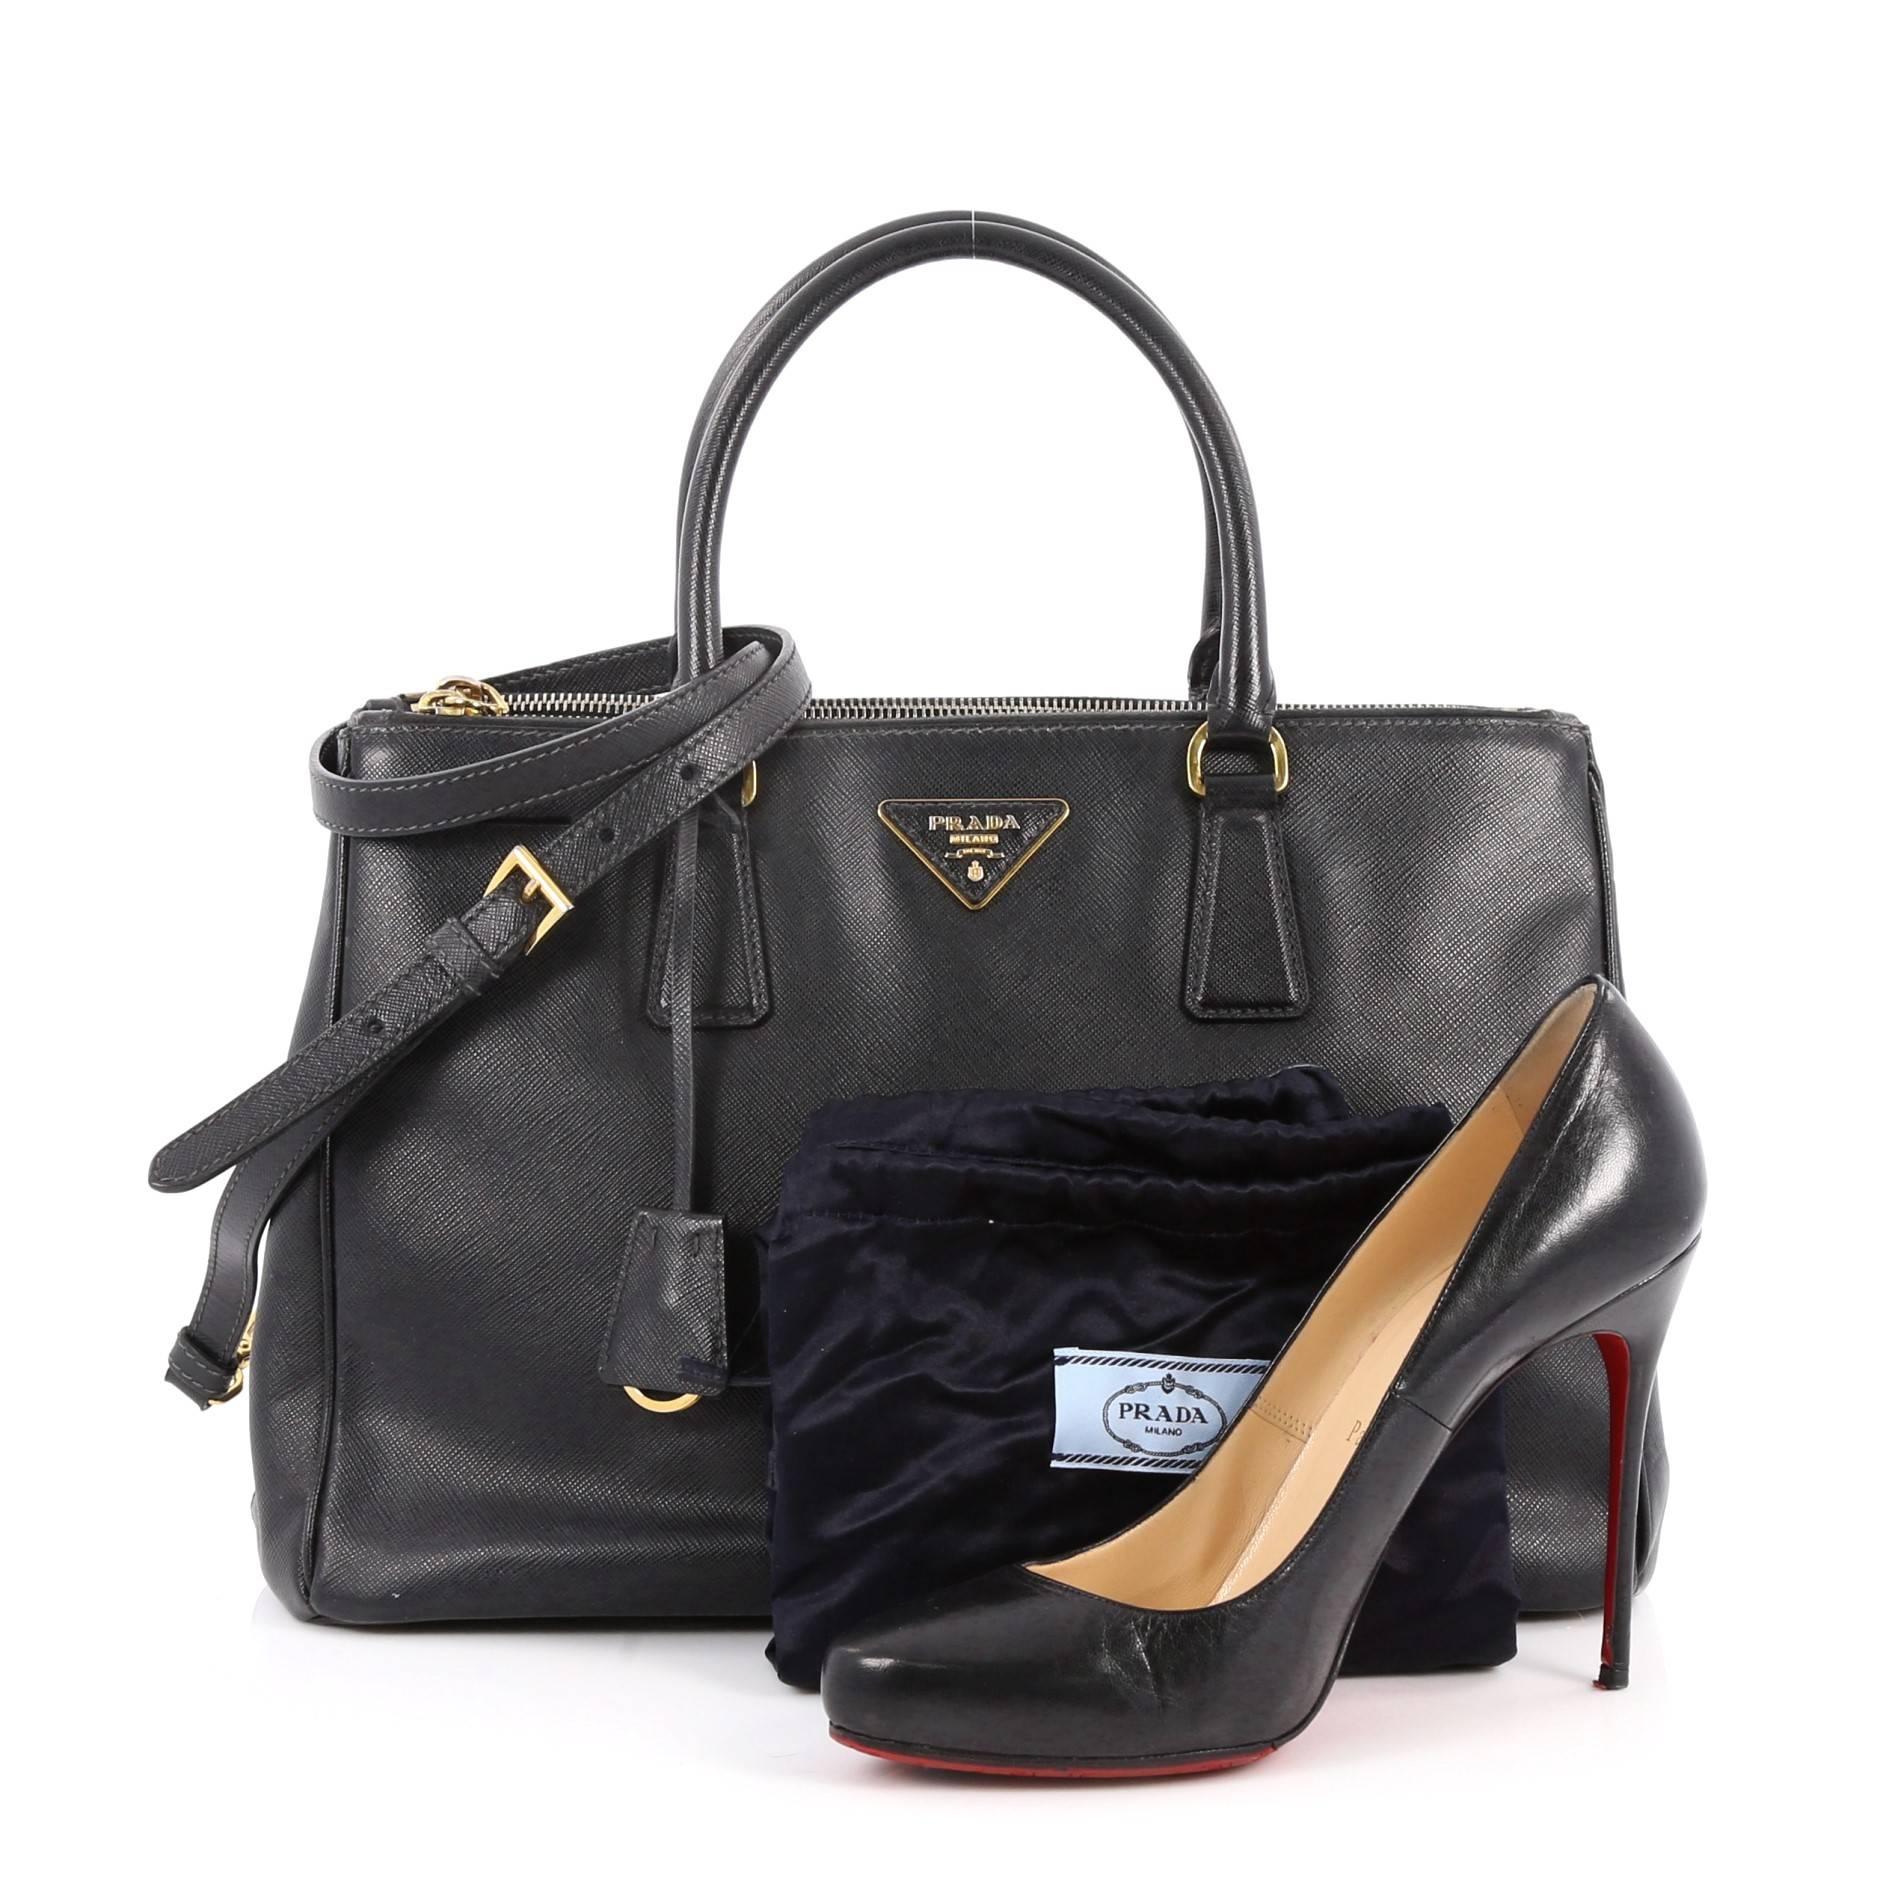 This authentic Prada Double Zip Lux Tote Saffiano Leather Medium is the perfect bag to complete any outfit. Crafted from black saffiano leather, this boxy tote features side snap buttons, raised Prada logo plate, dual-rolled leather handles and